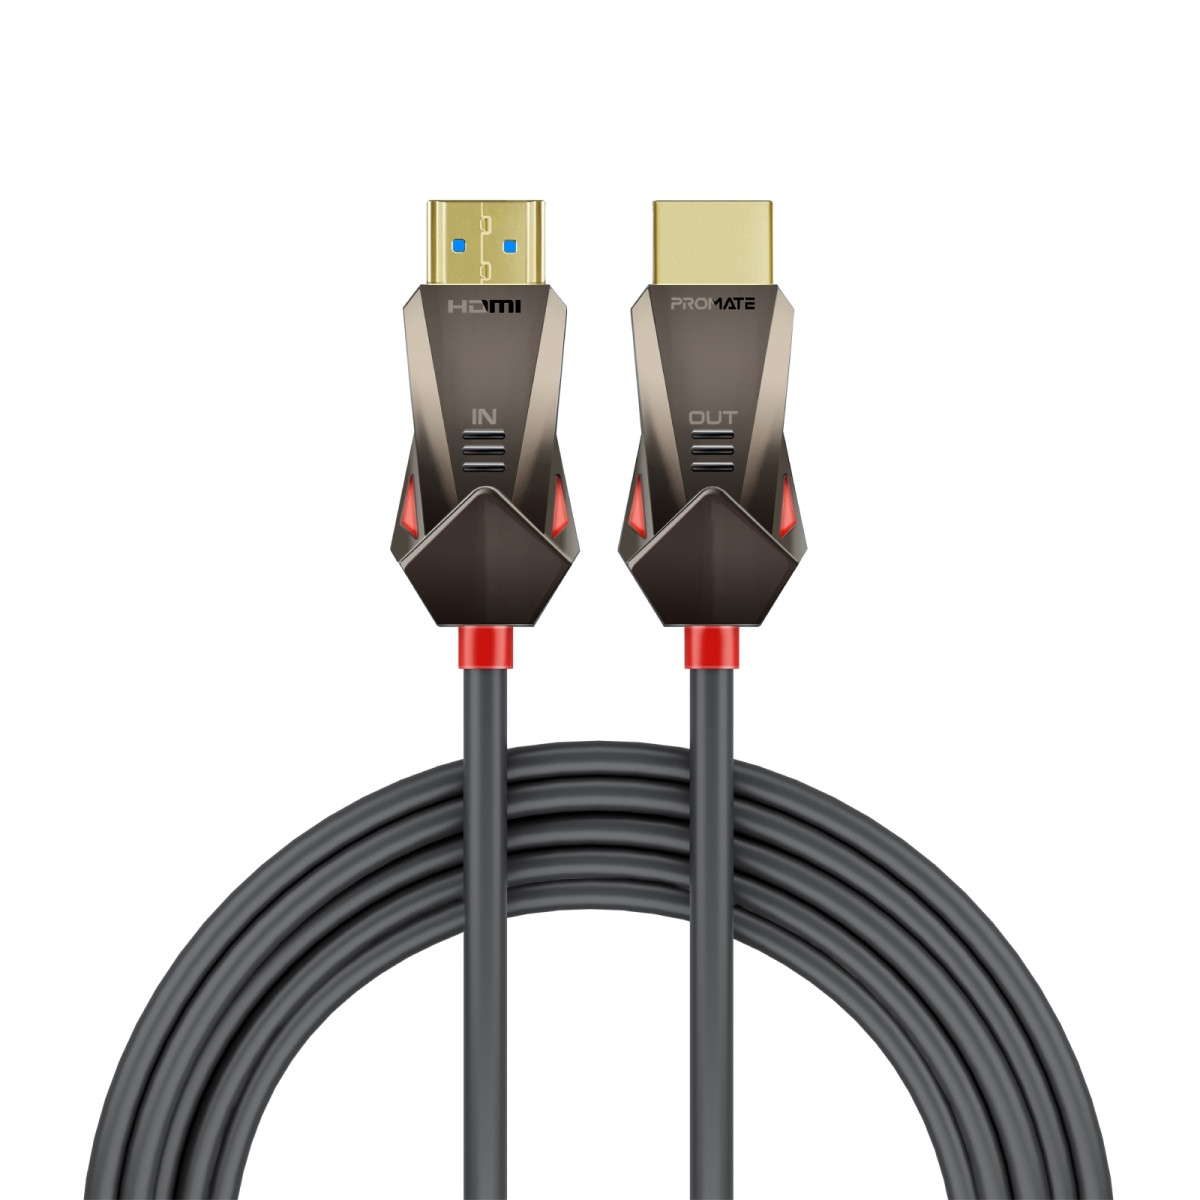 Promate HDMI 2.0 Cable, 4K@60Hz HDMI to HDMI Unidirectional Cable with 3D Video Support, 18Gbps Bandwidth, Ethernet, 20M Fiber Optic Cable and Gold-Plated Connectors for Laptops, Monitors, ProLink4K60-20M